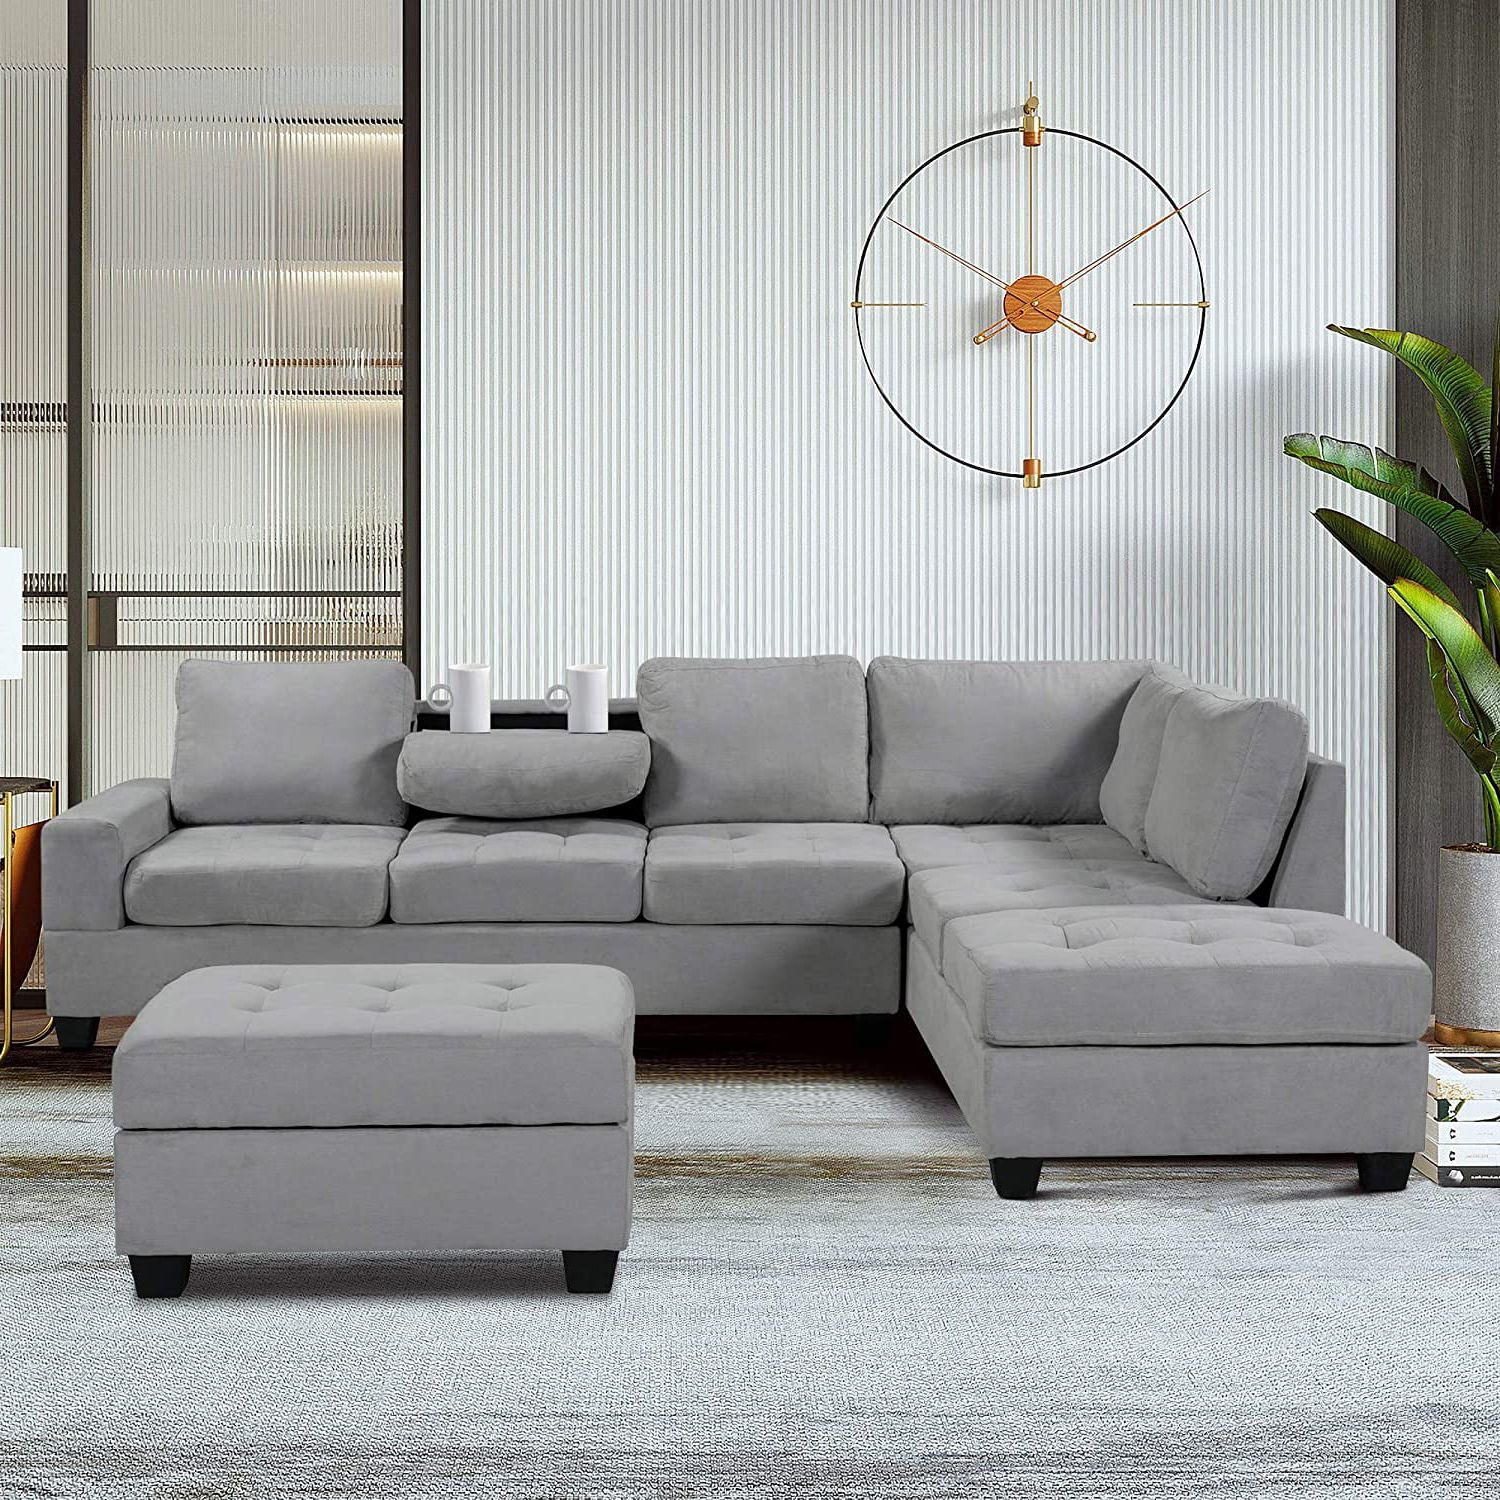 2017 Sofas With Ottomans Regarding 3 Piece Convertible Sectional Sofa L Shaped Couch With Reversible (View 15 of 15)